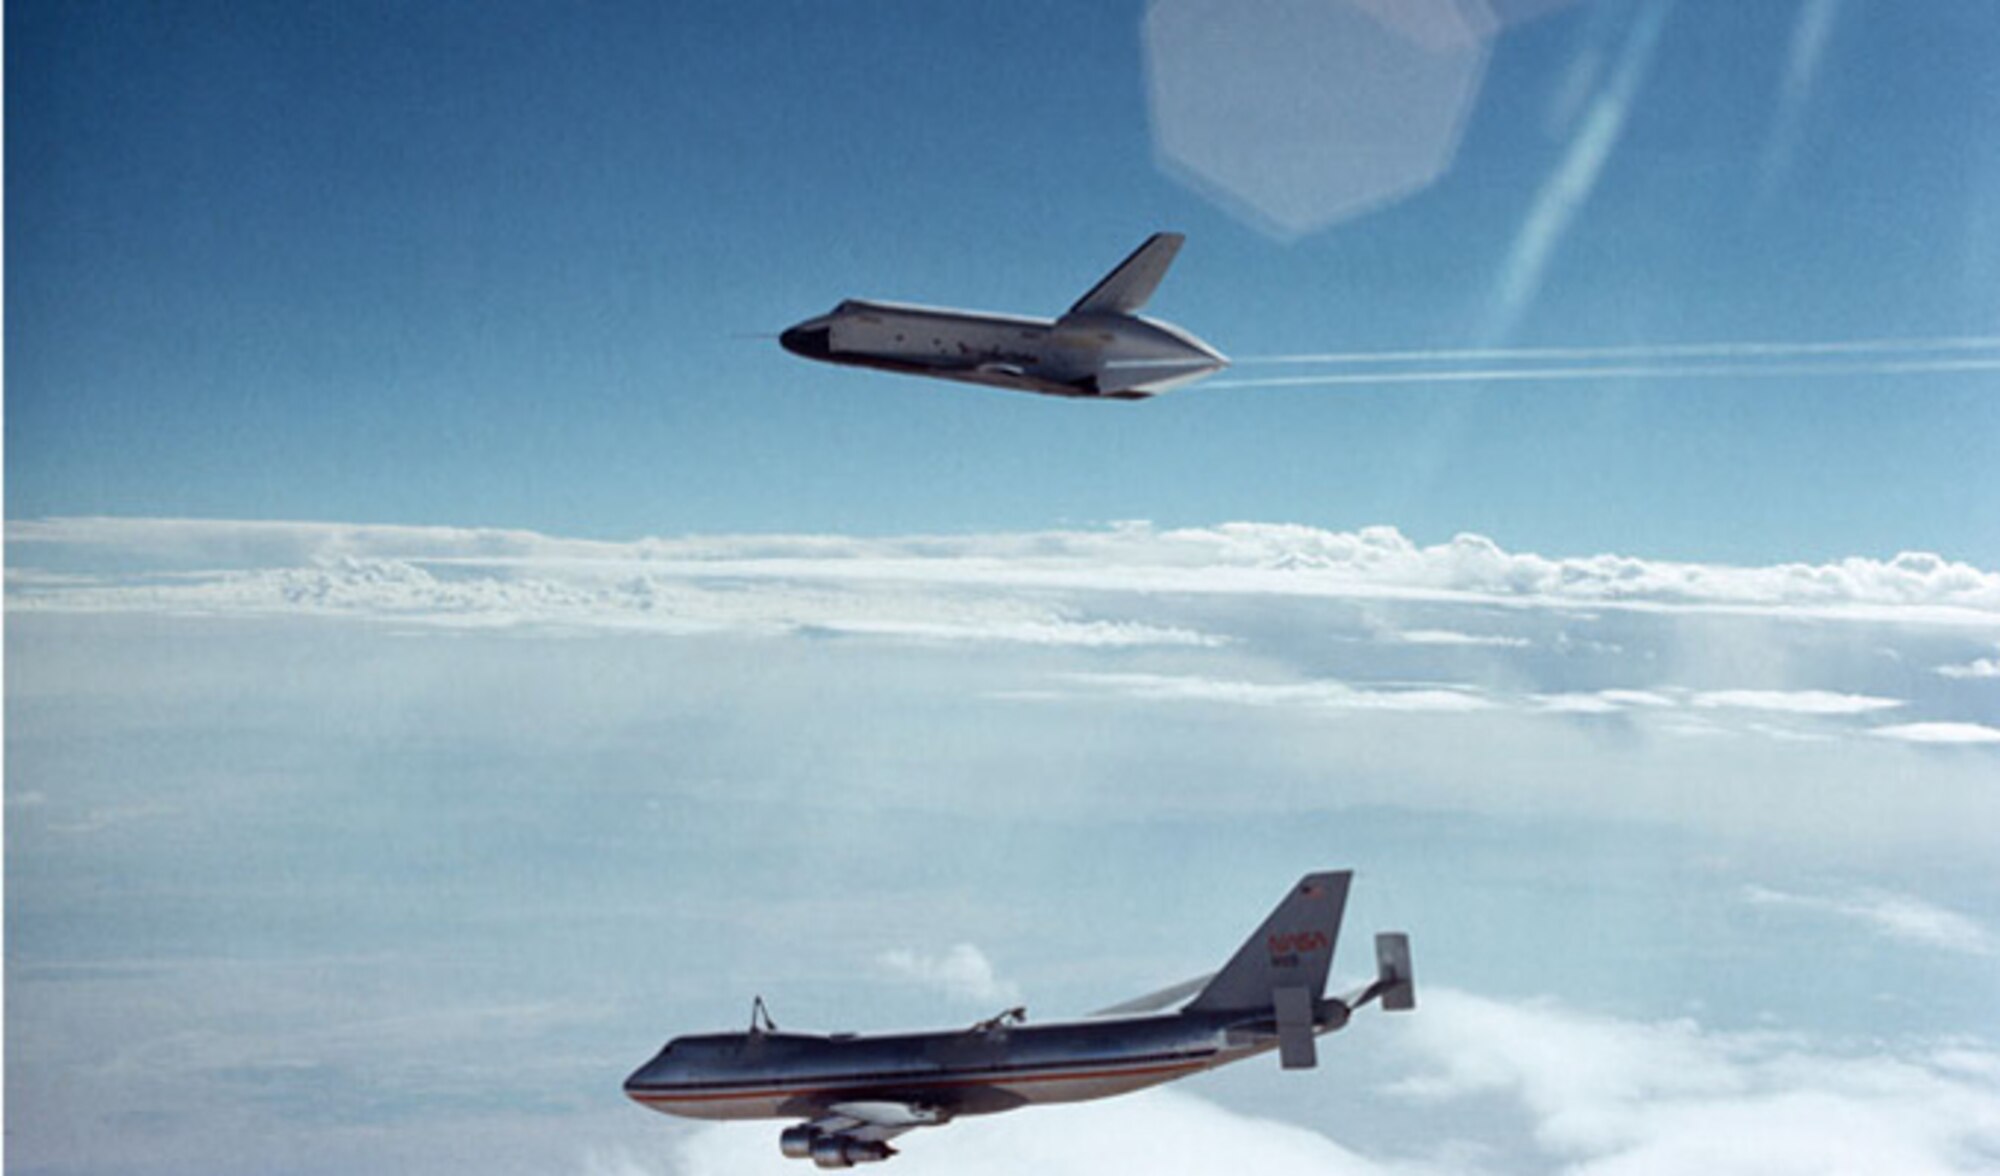 Space Shuttle Enterprise, with Fullerton and astronaut Fred Haise on board, soars above the NASA 747 carrier aircraft during the first free flight of the shuttle approach and landing tests at NASA Dryden Flight Research Center, Calif., in Aug. 1977. (NASA photo)